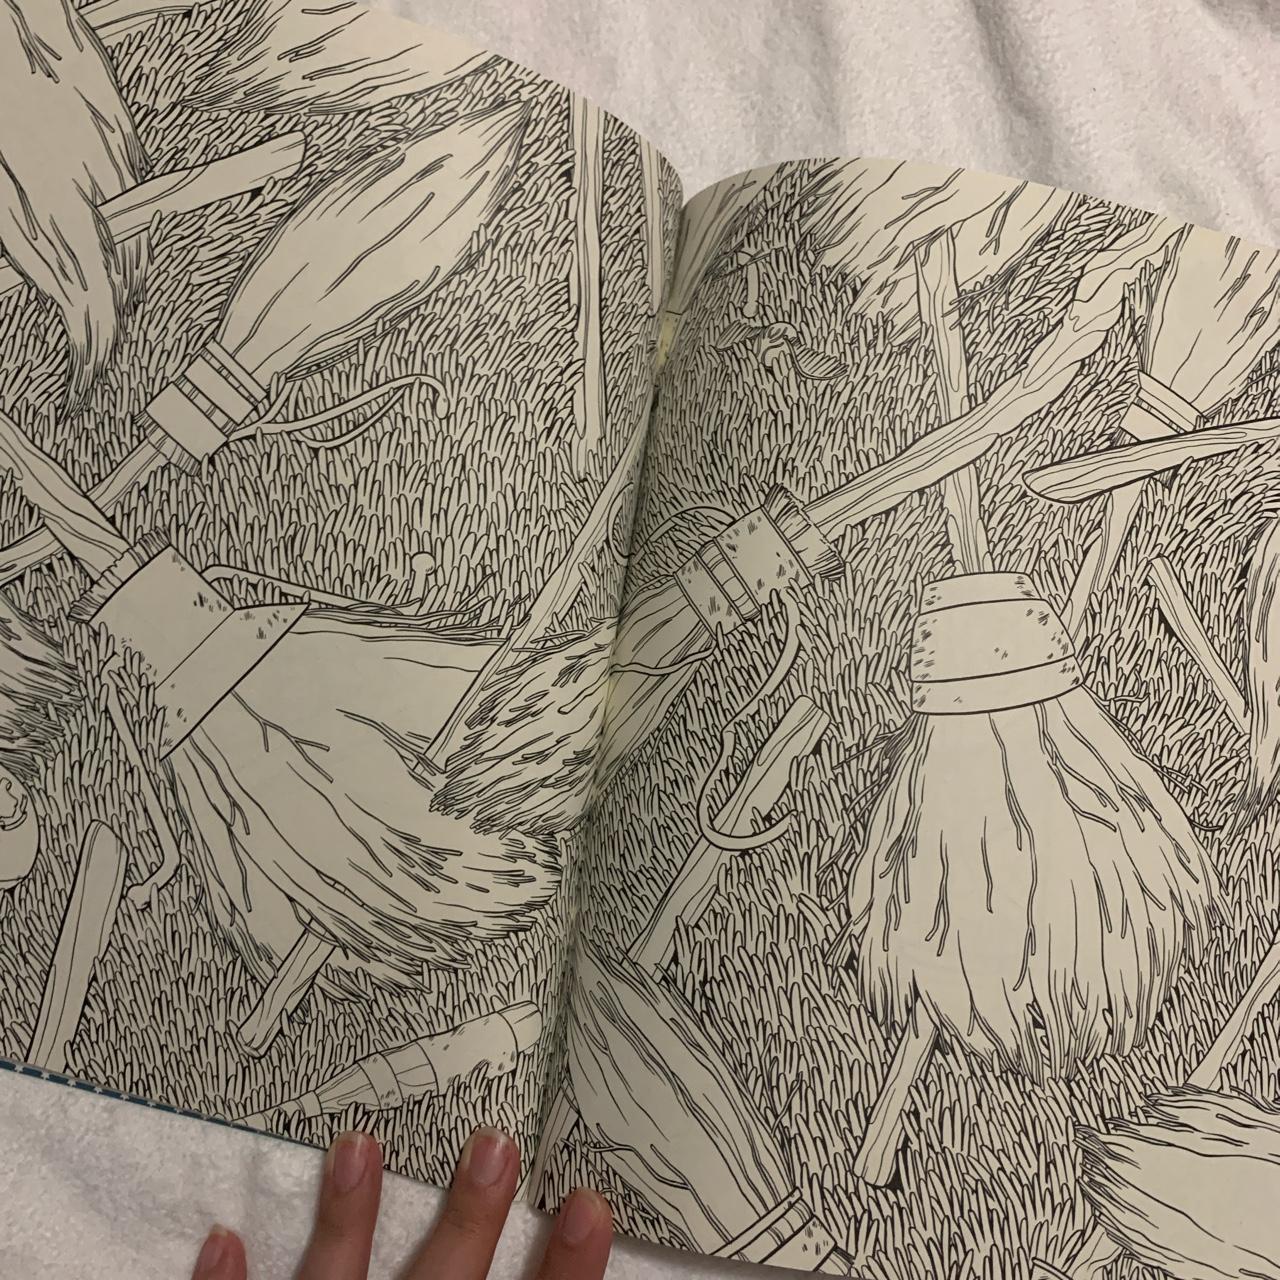 Harry Potter coloring book! 90 pages of beautifully - Depop